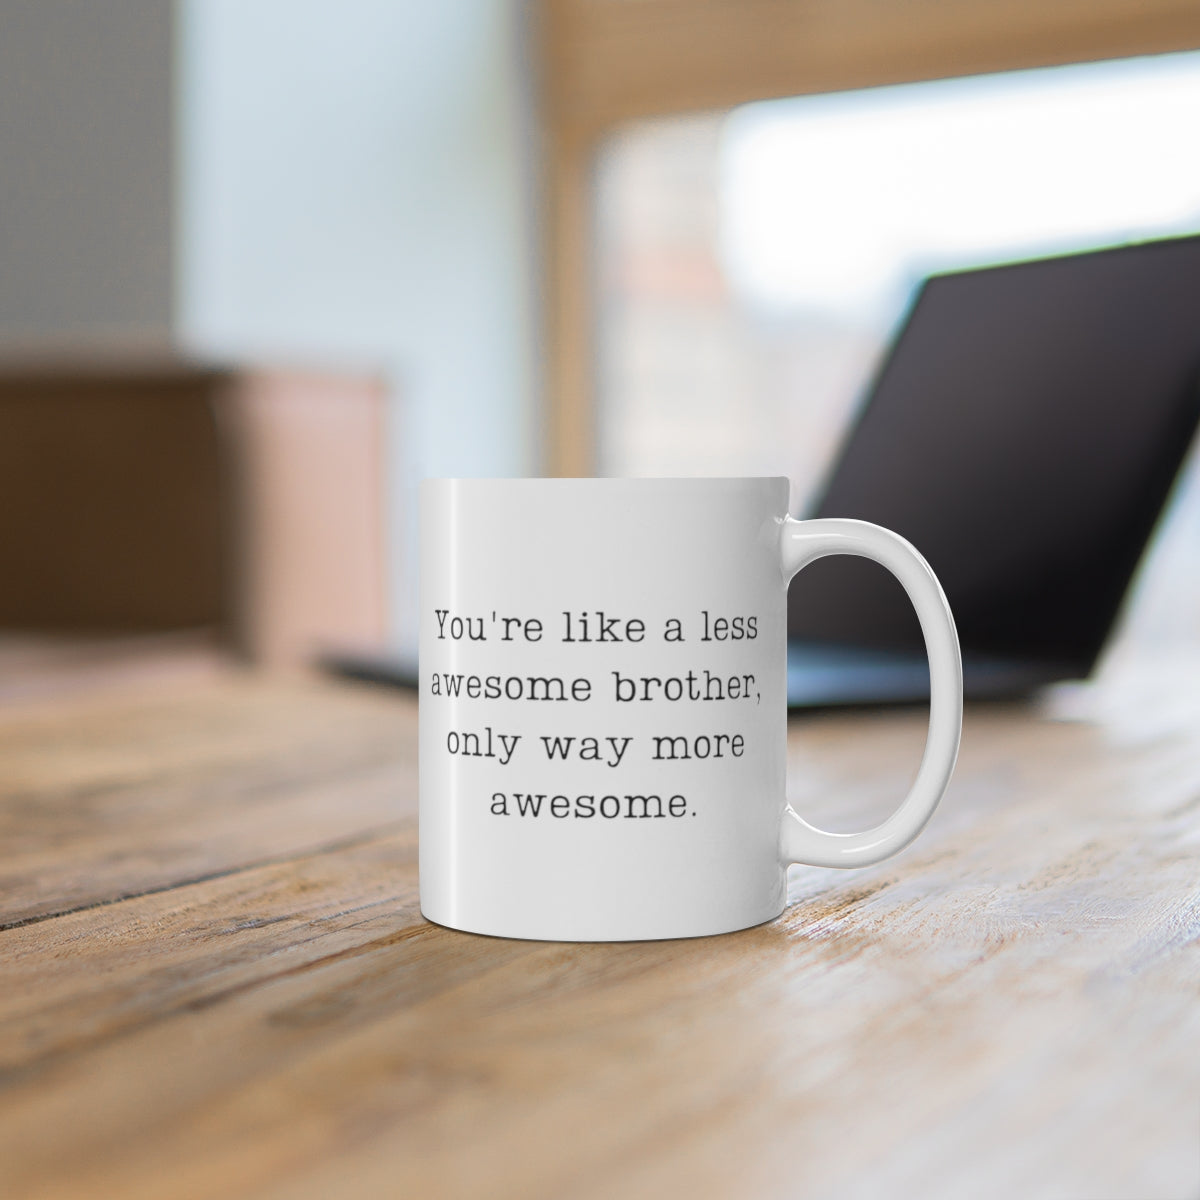 You're Like A Less Awesome Brother, Only Way More Awesome | Funny, Snarky Gift | White Ceramic Mug, Typewriter Font